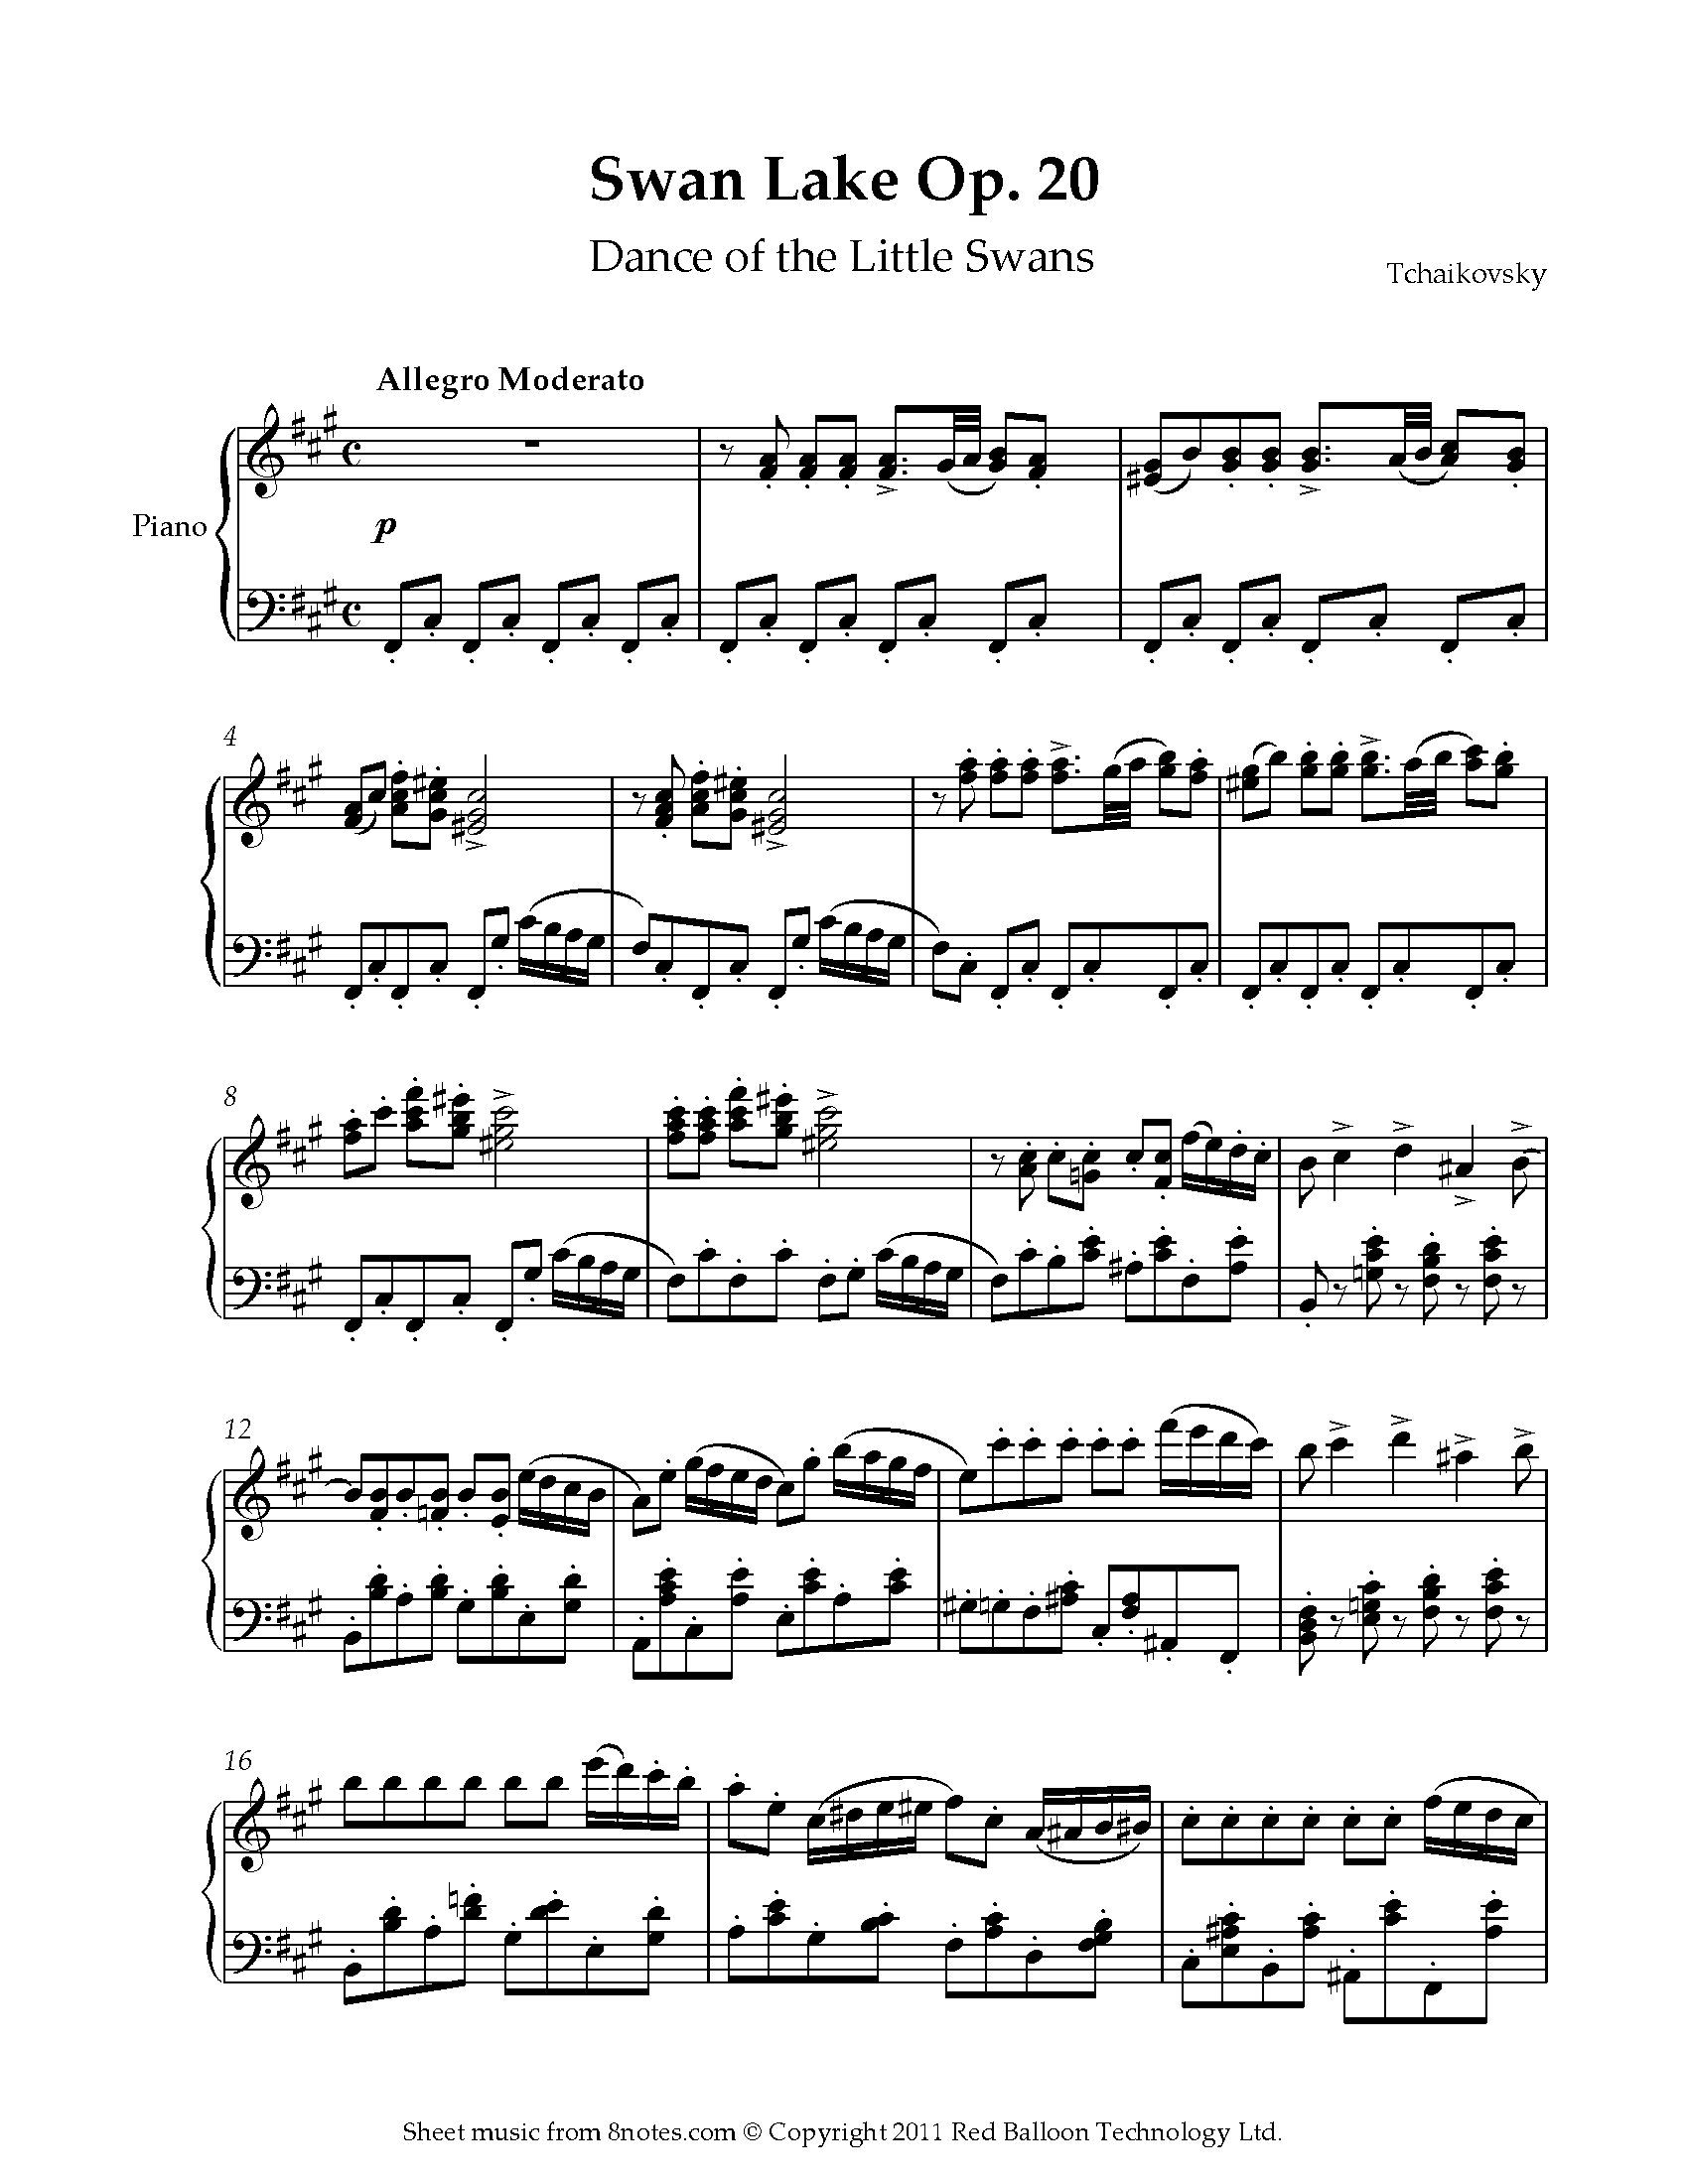 Dance the Little Swans from Swan Lake Op. 20 Sheet music for Piano - 8notes.com